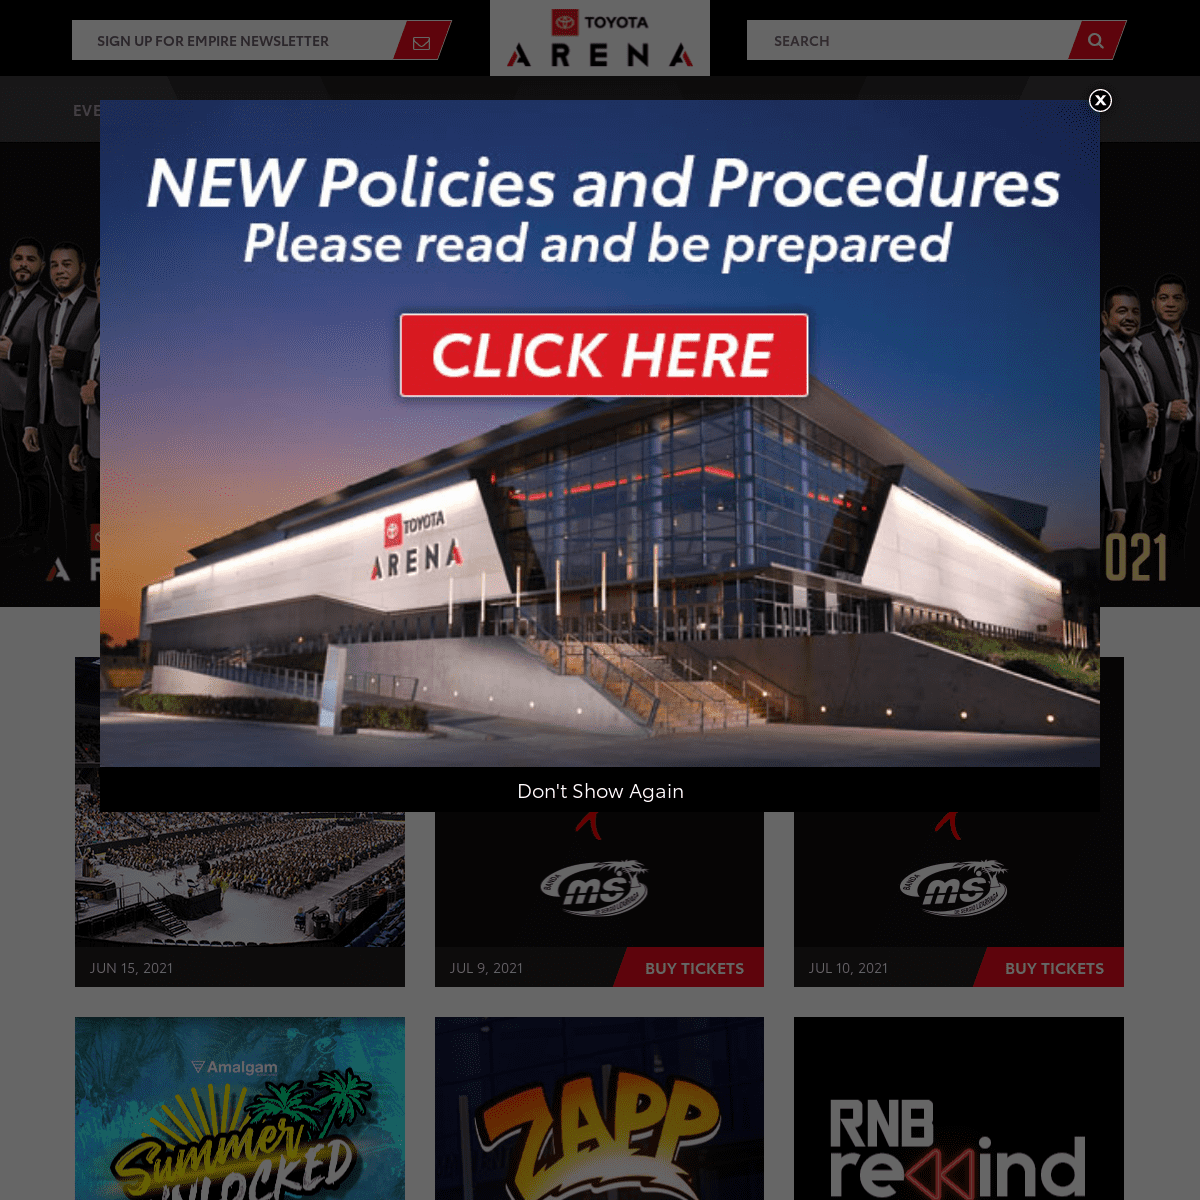 A complete backup of https://toyota-arena.com